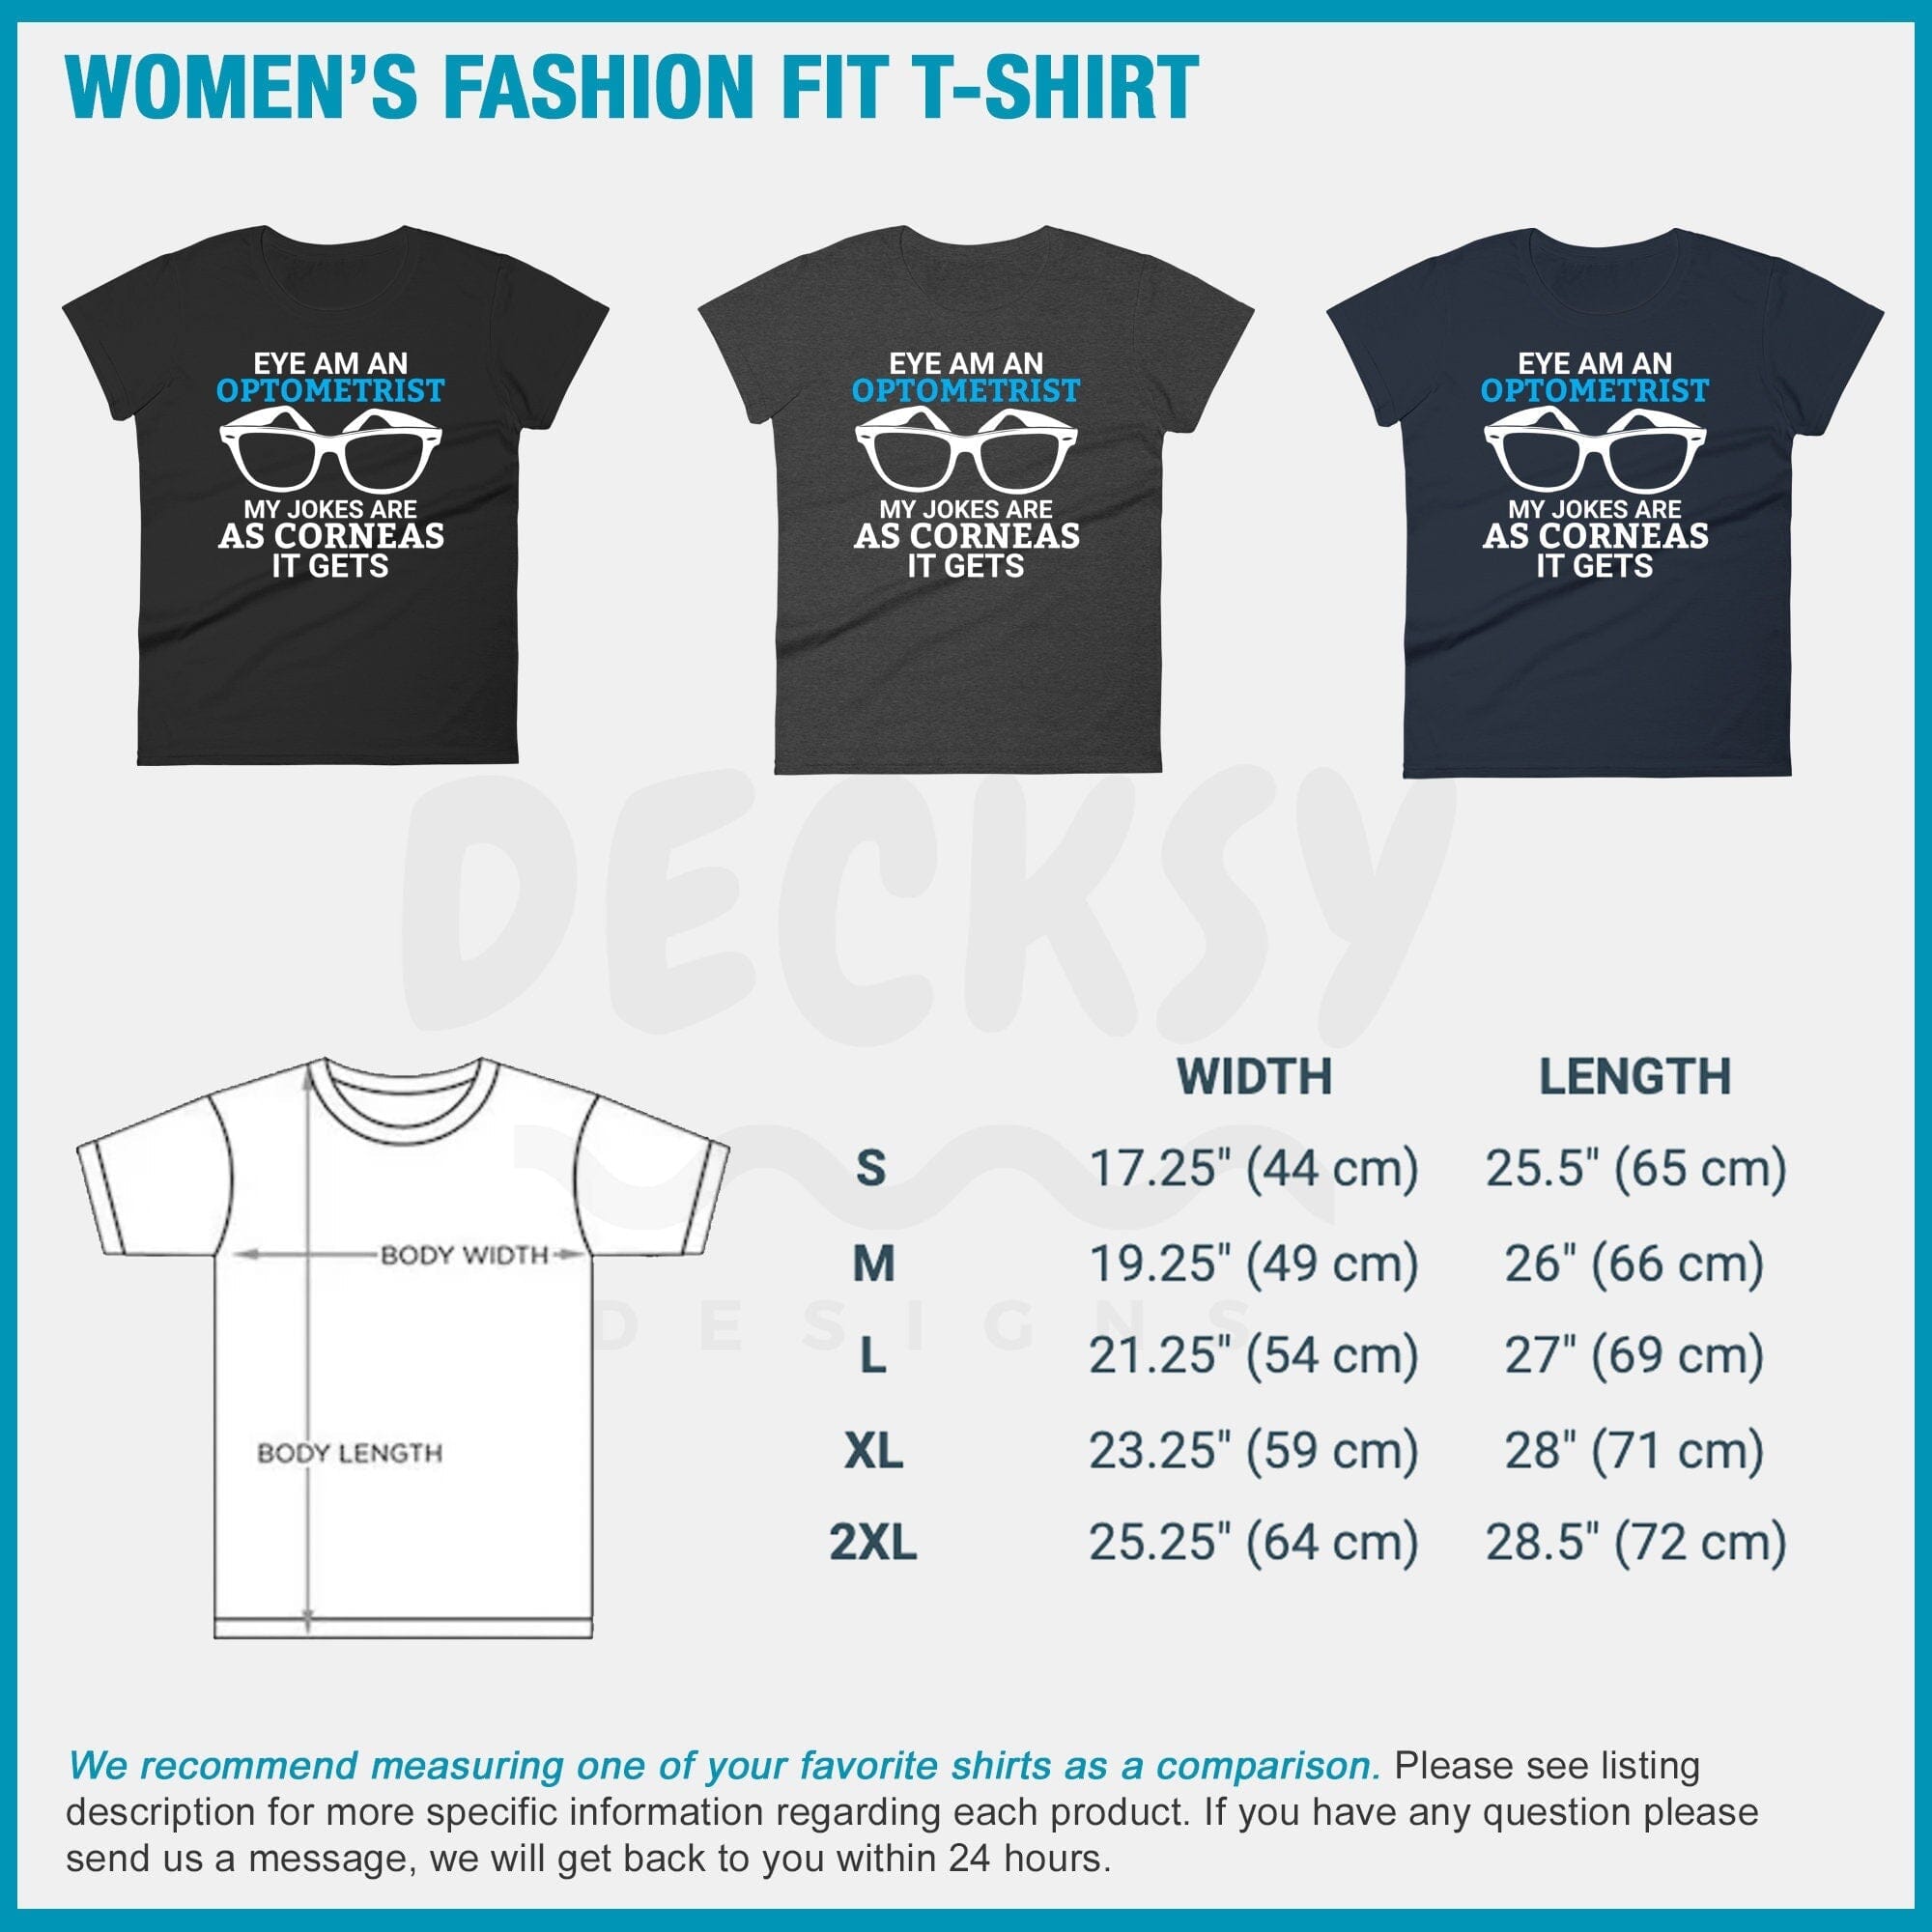 Optometrist Shirt, Gift for Optometry Student-Clothing:Gender-Neutral Adult Clothing:Tops & Tees:T-shirts:Graphic Tees-DecksyDesigns